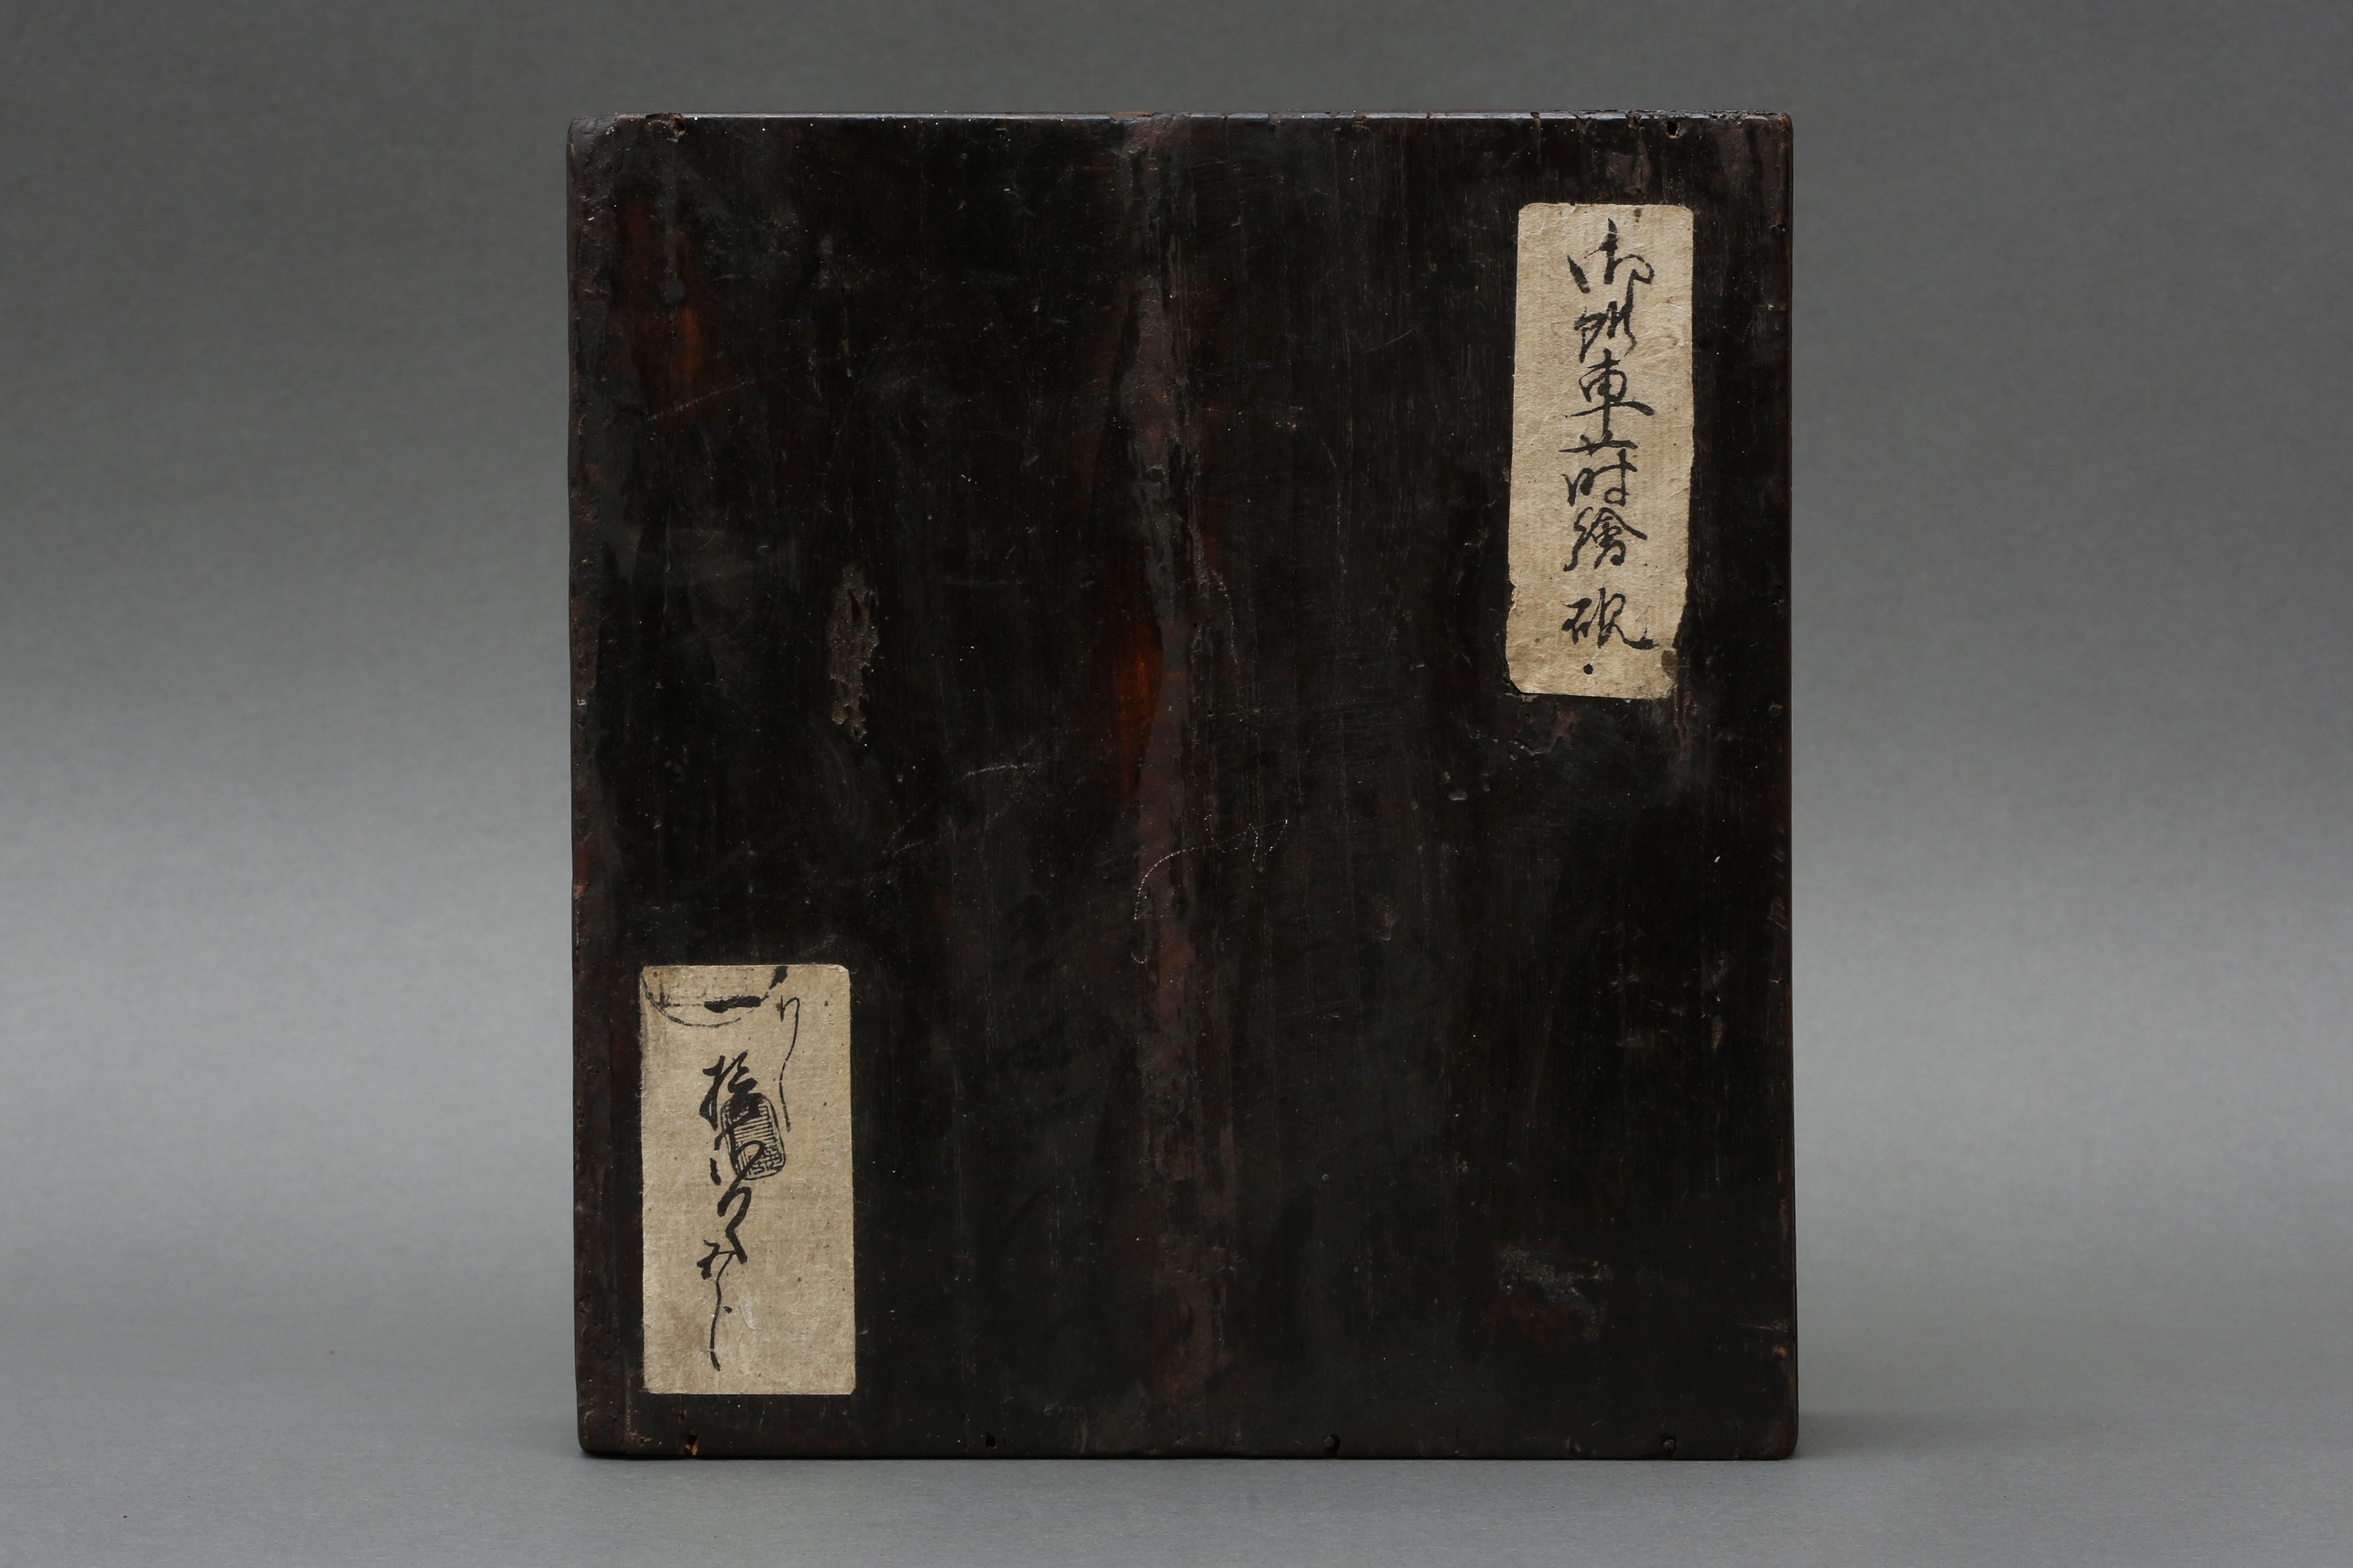 A JAPANESE RYUKYU ISLAND-STYLE MOTHER-OF-PEARL INLAID BLACK LACQUER BOX AND COVER - Image 7 of 7